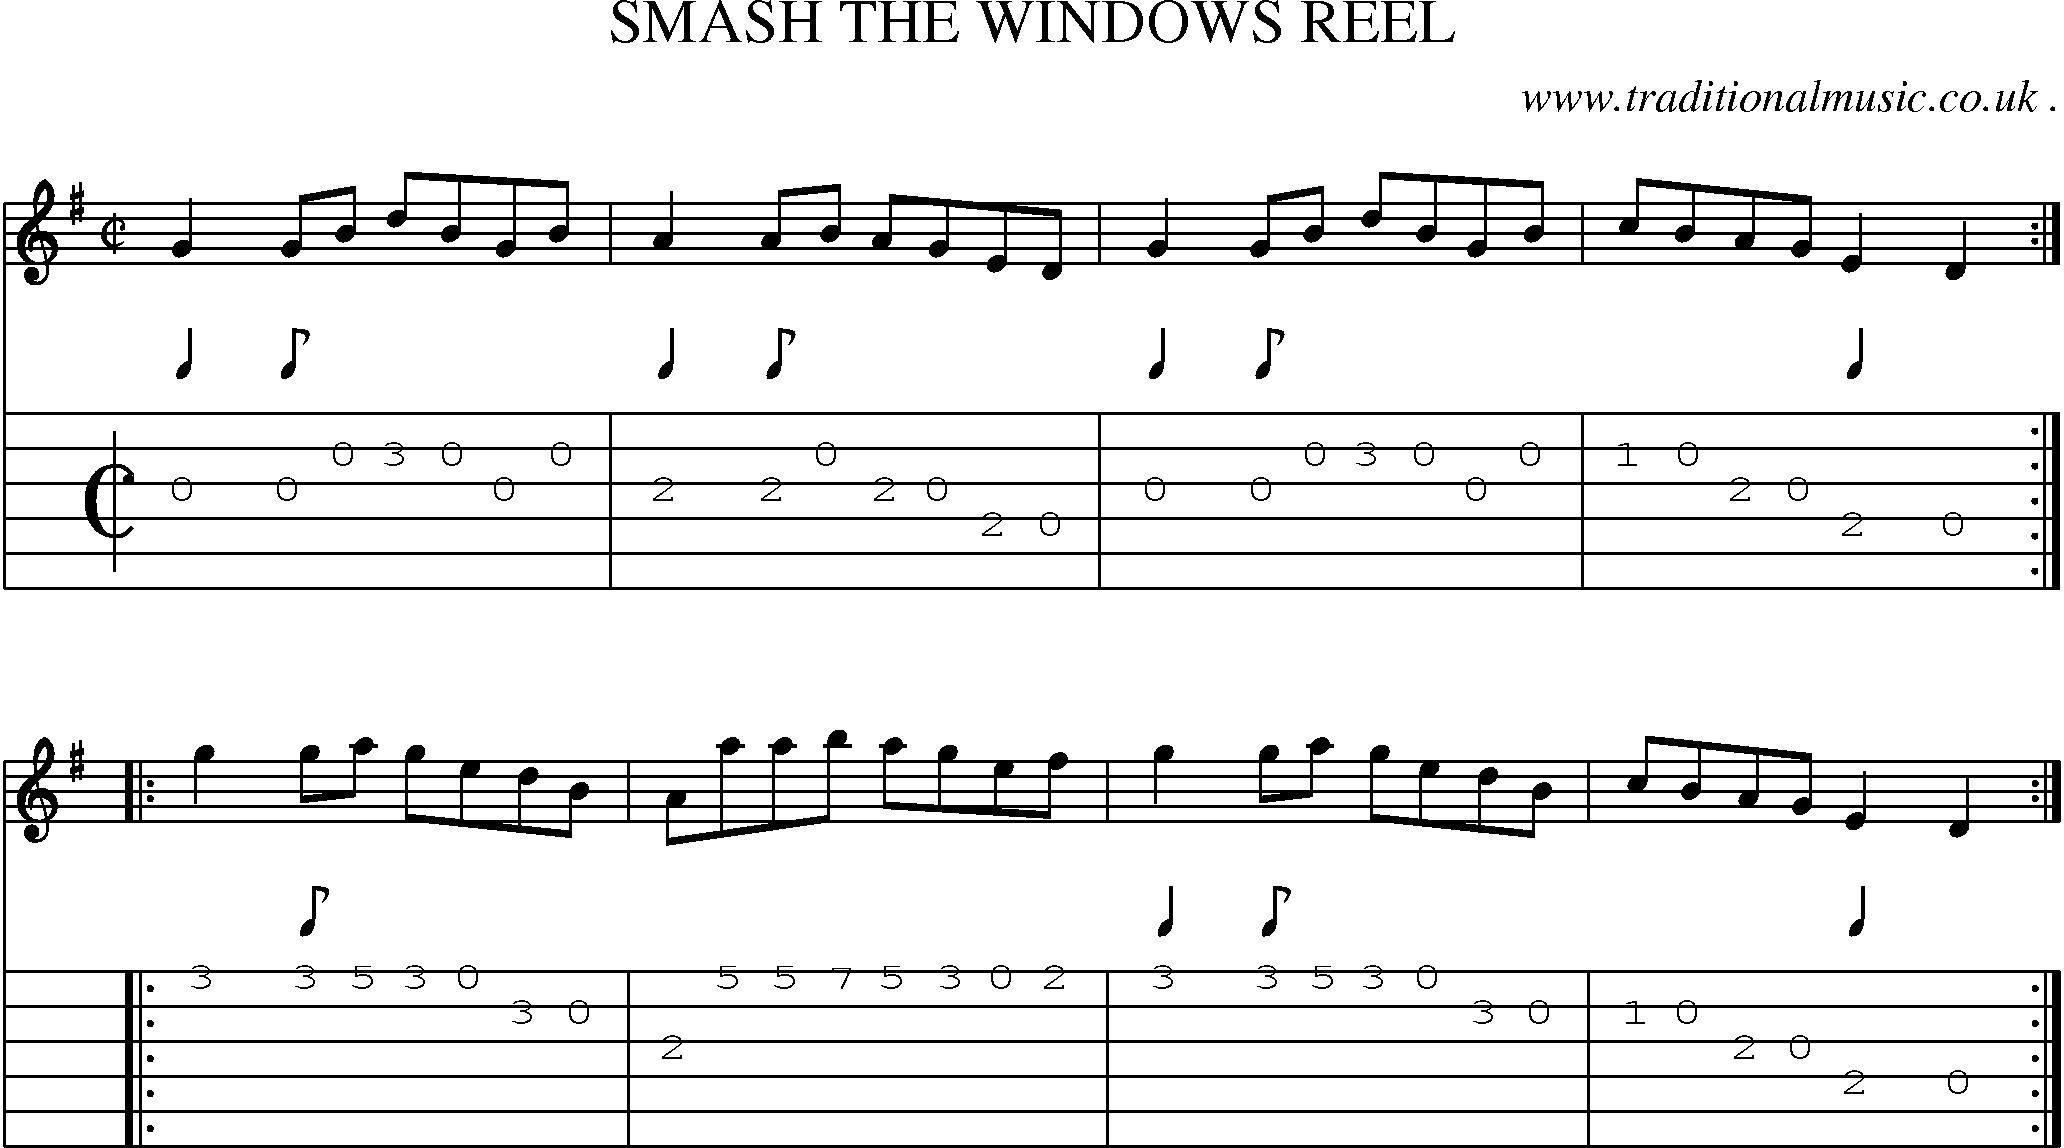 Sheet-Music and Guitar Tabs for Smash The Windows Reel